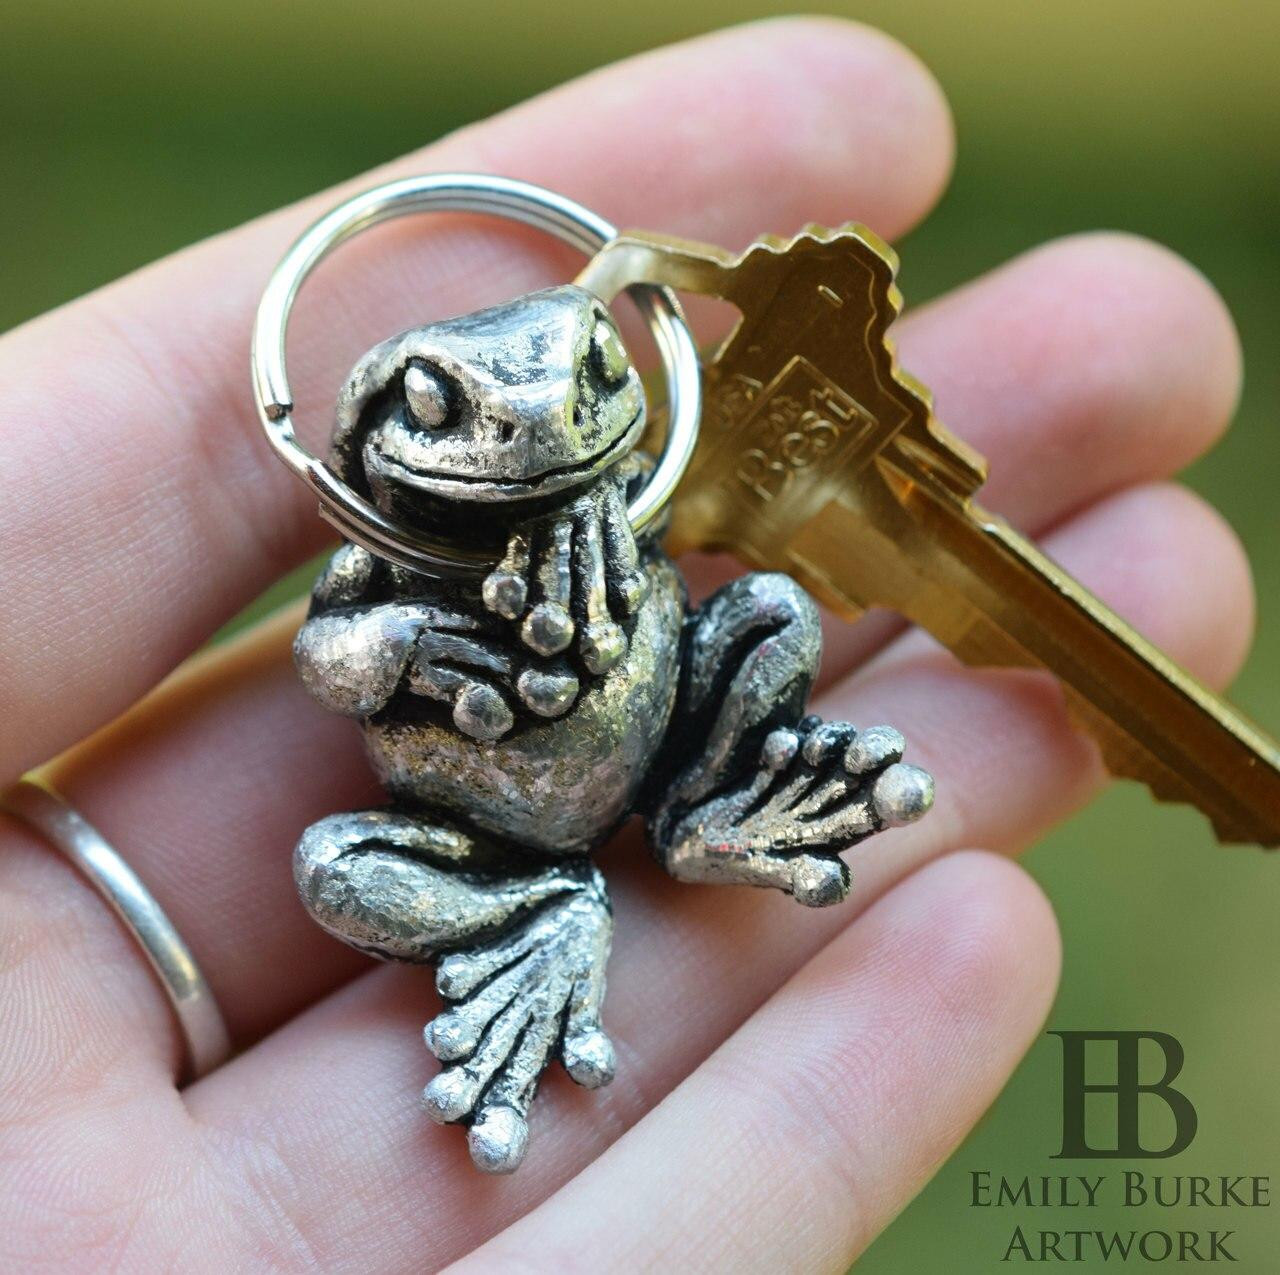 https://cdn11.bigcommerce.com/s-1e9zos/images/stencil/1280x1280/products/1414/6544/emily-burke-artwork-tree-frog-keychain-pewter-by-emily-burke__42528.1632845845.jpg?c=2